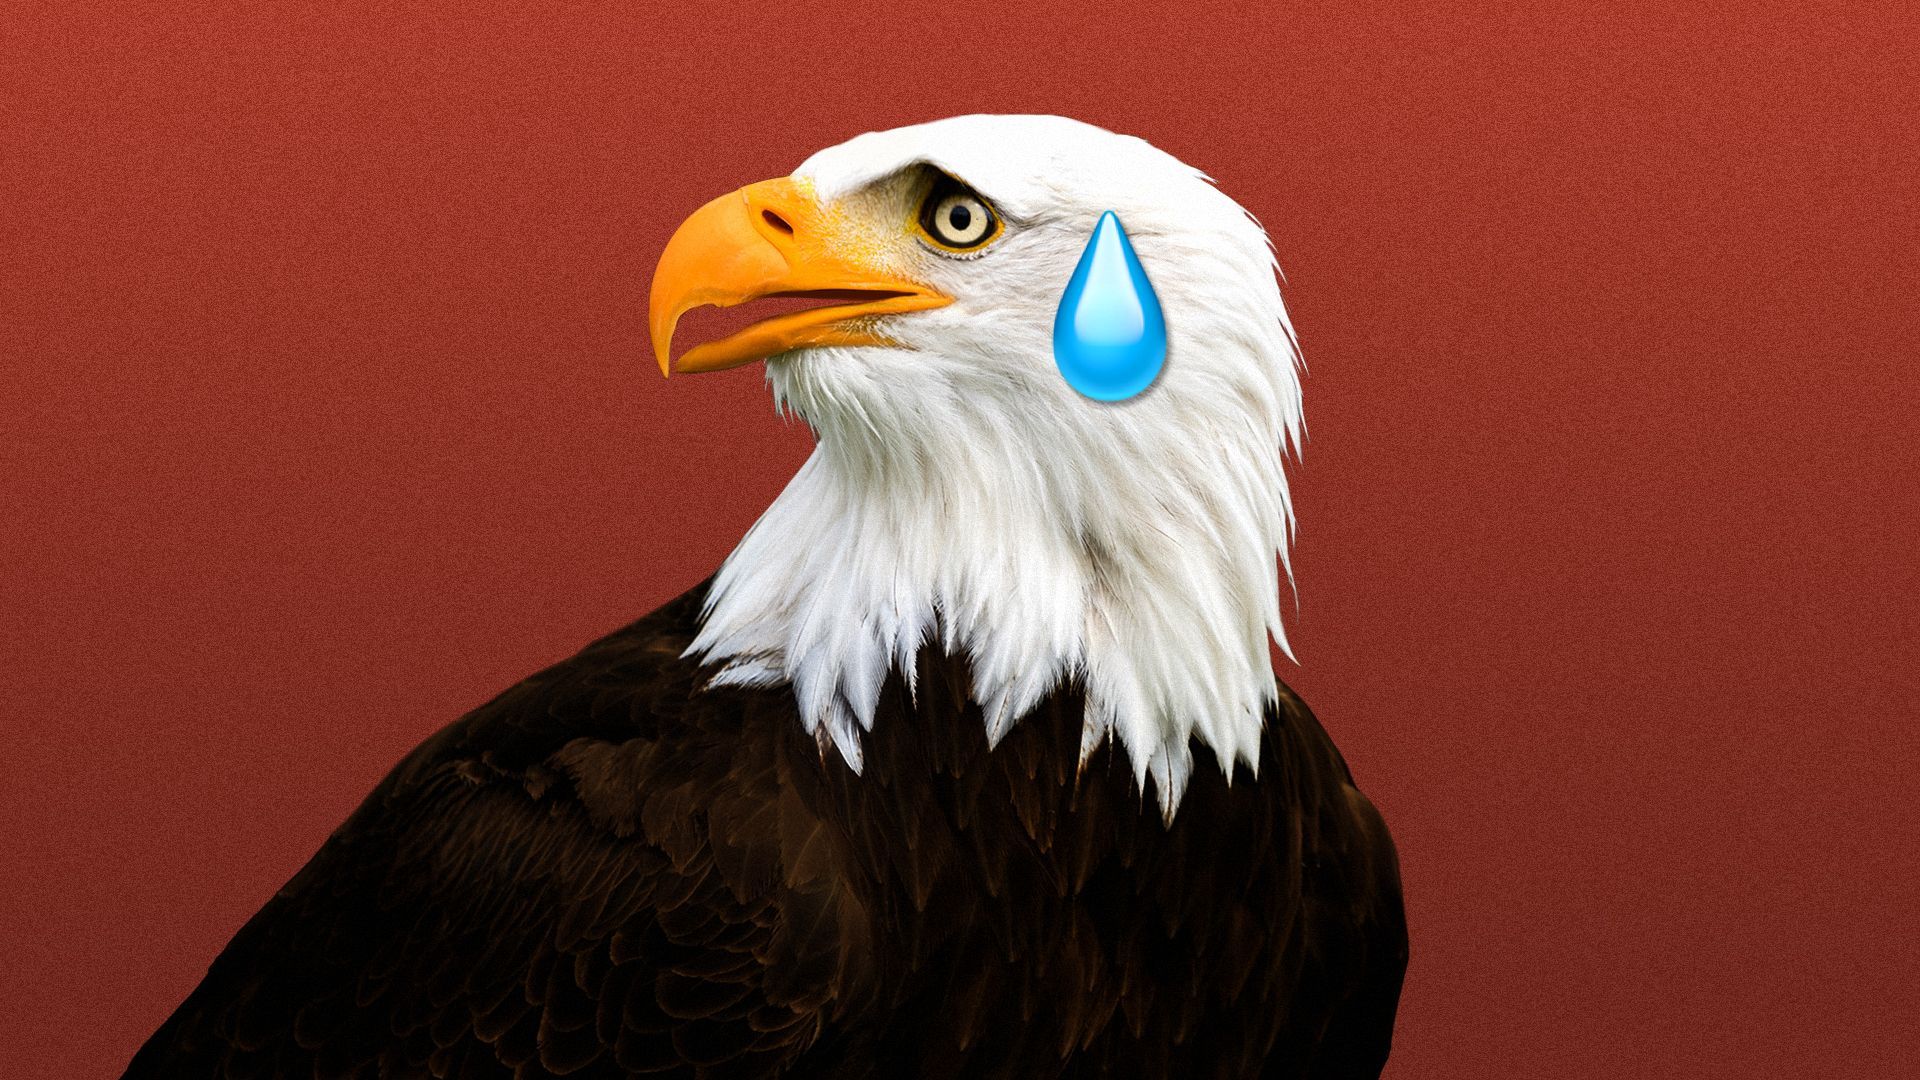 Illustration of a nervous bald eagle with a sweat drop on its face.